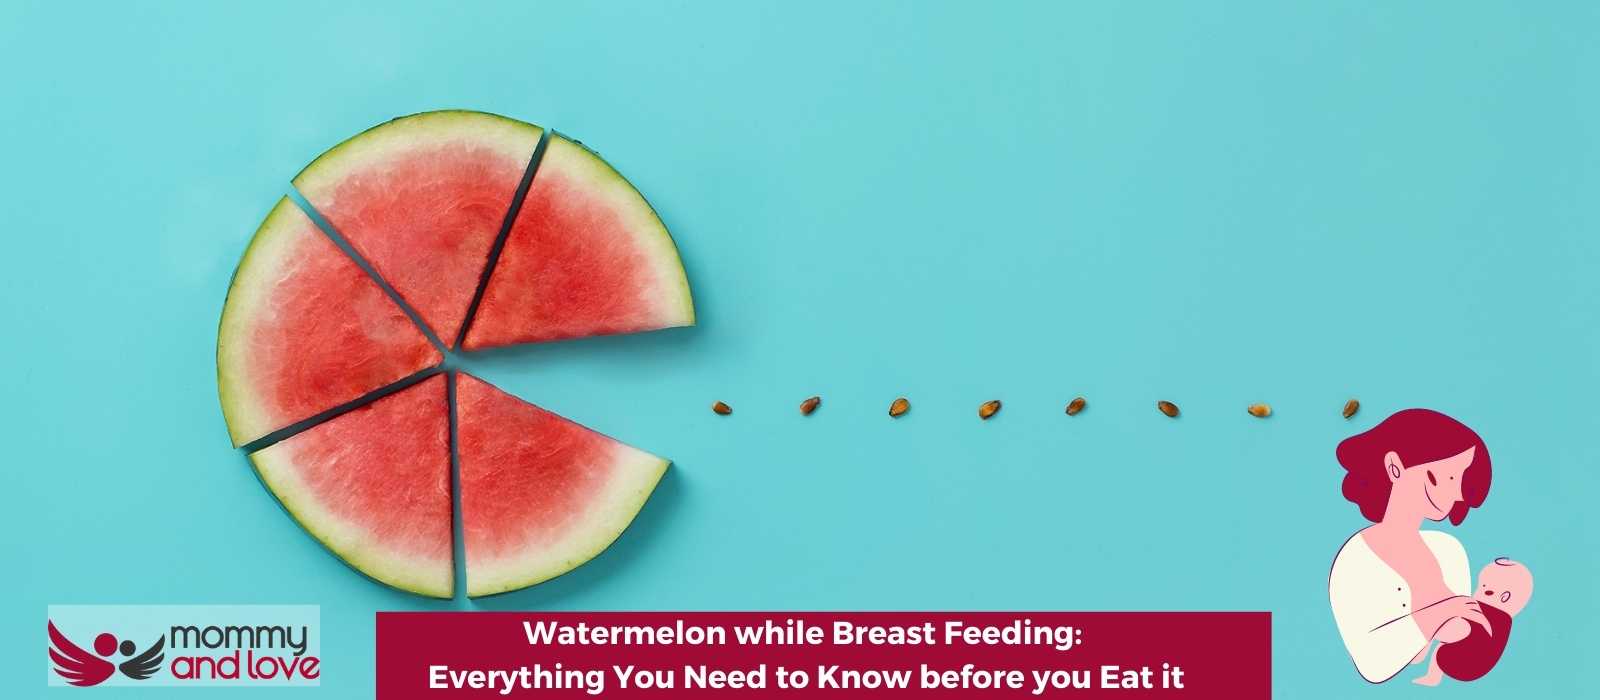 Watermelon while Breast Feeding: Everything You Need to Know before you Eat it